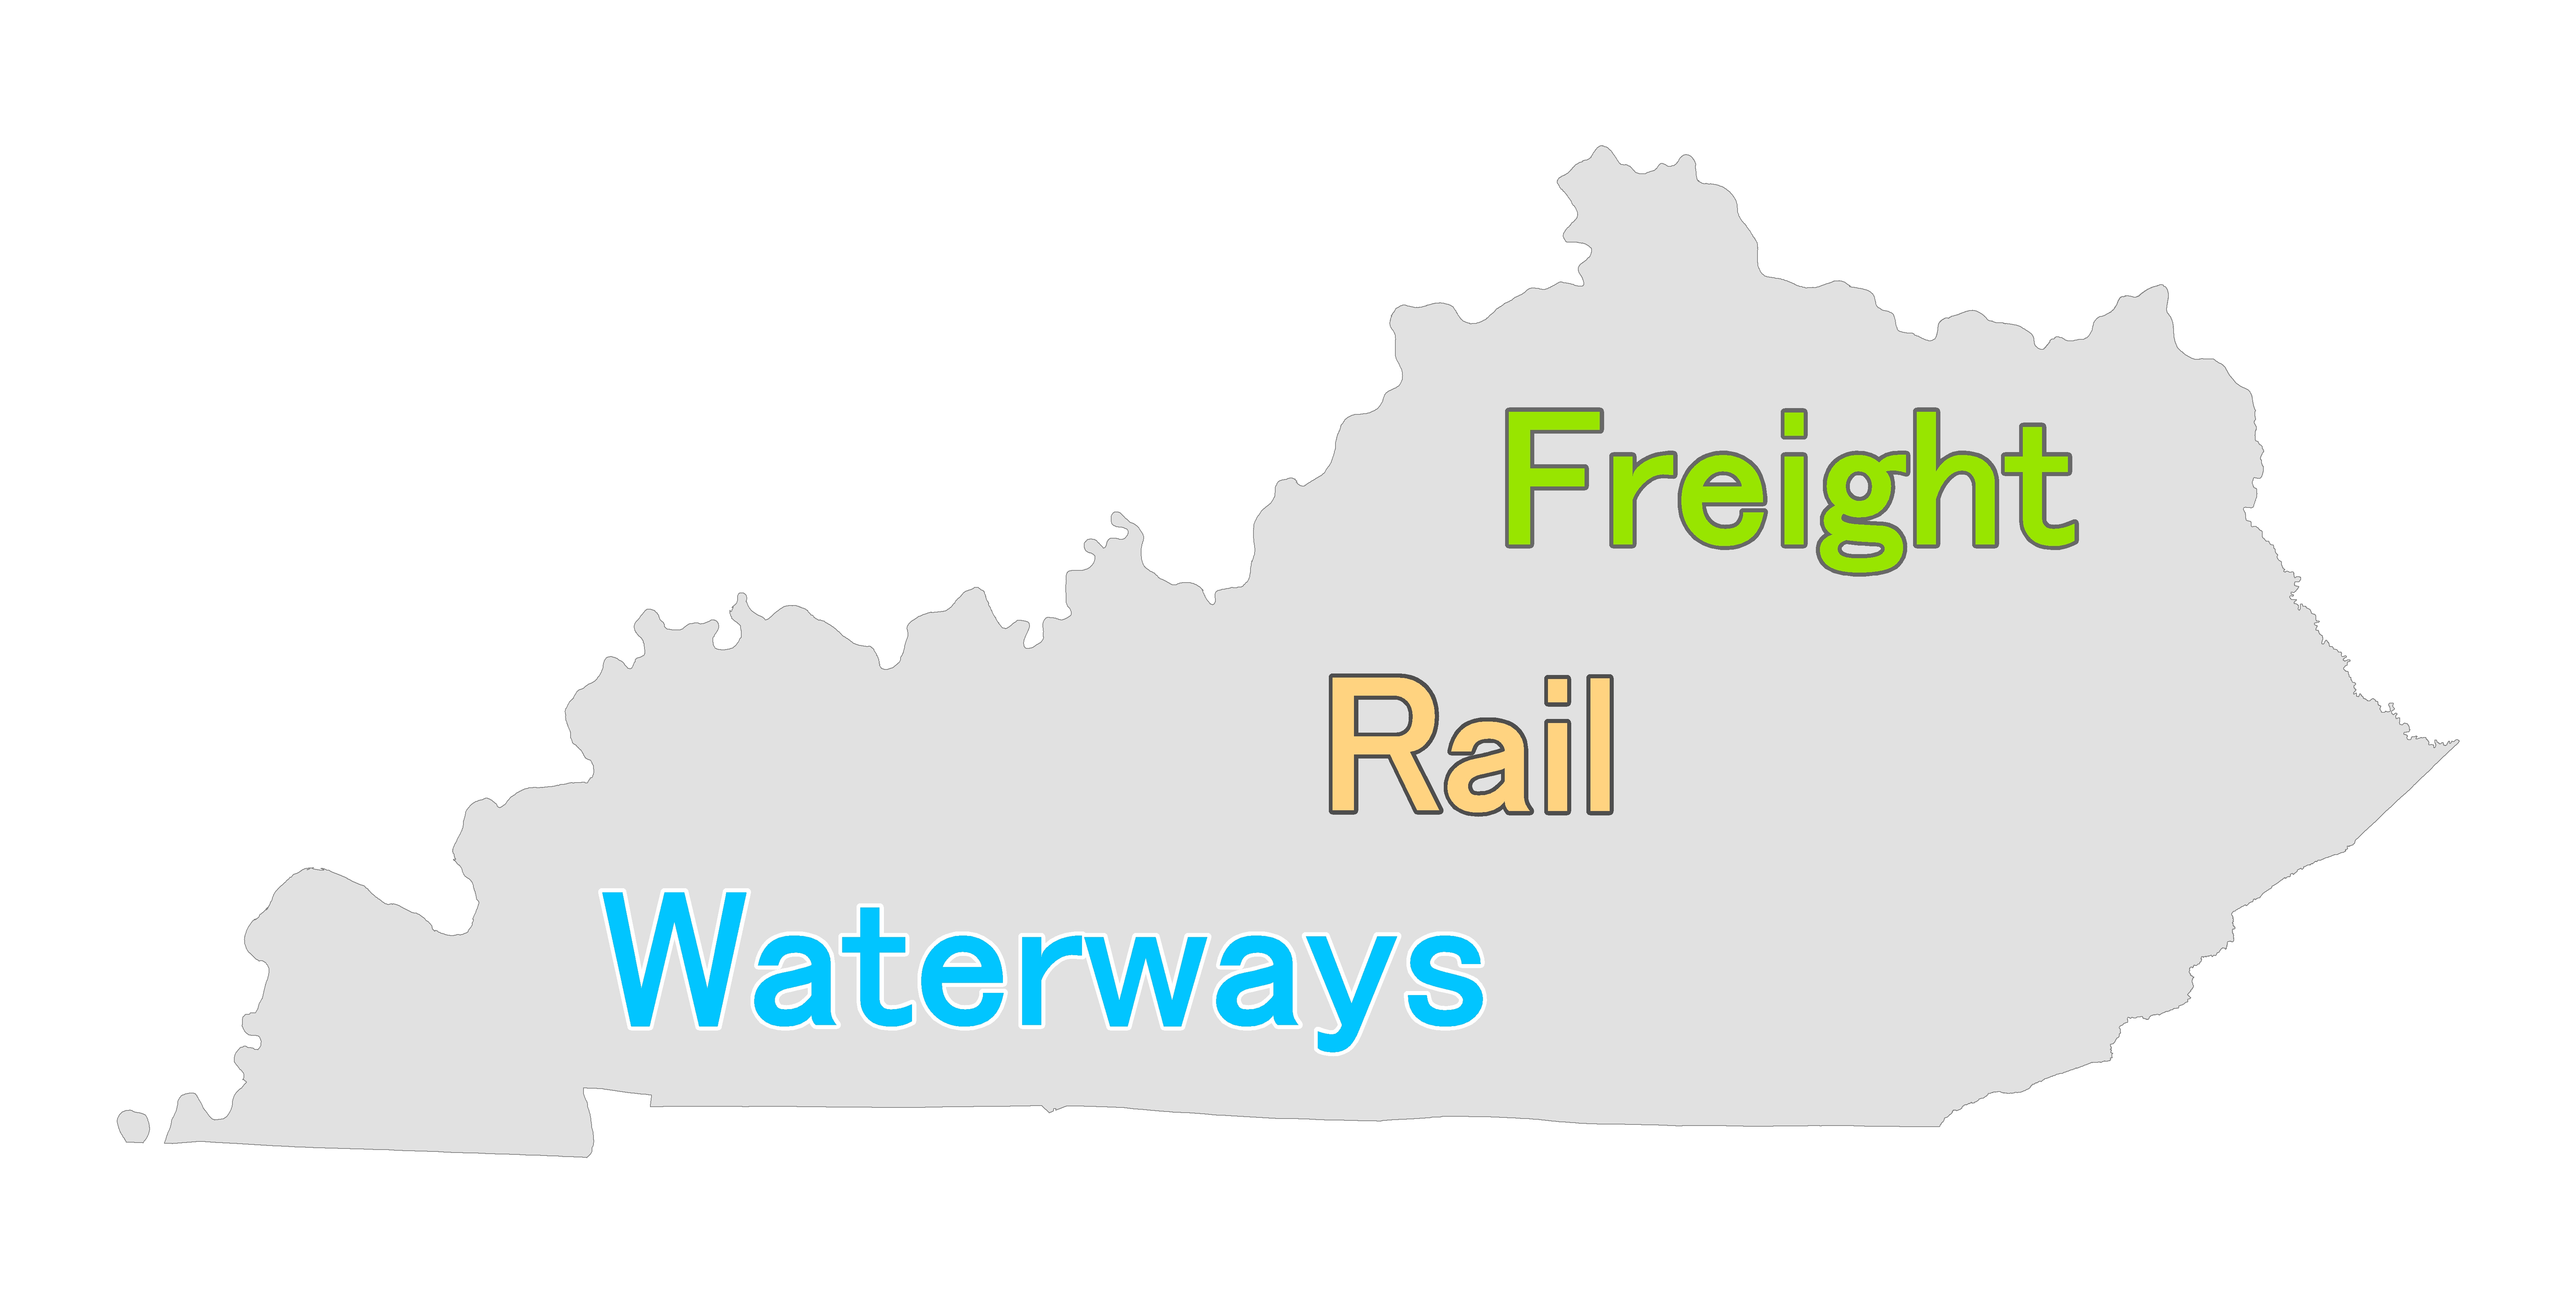 Map of Kentucky's boundary with the words Freight Rail and Waterways